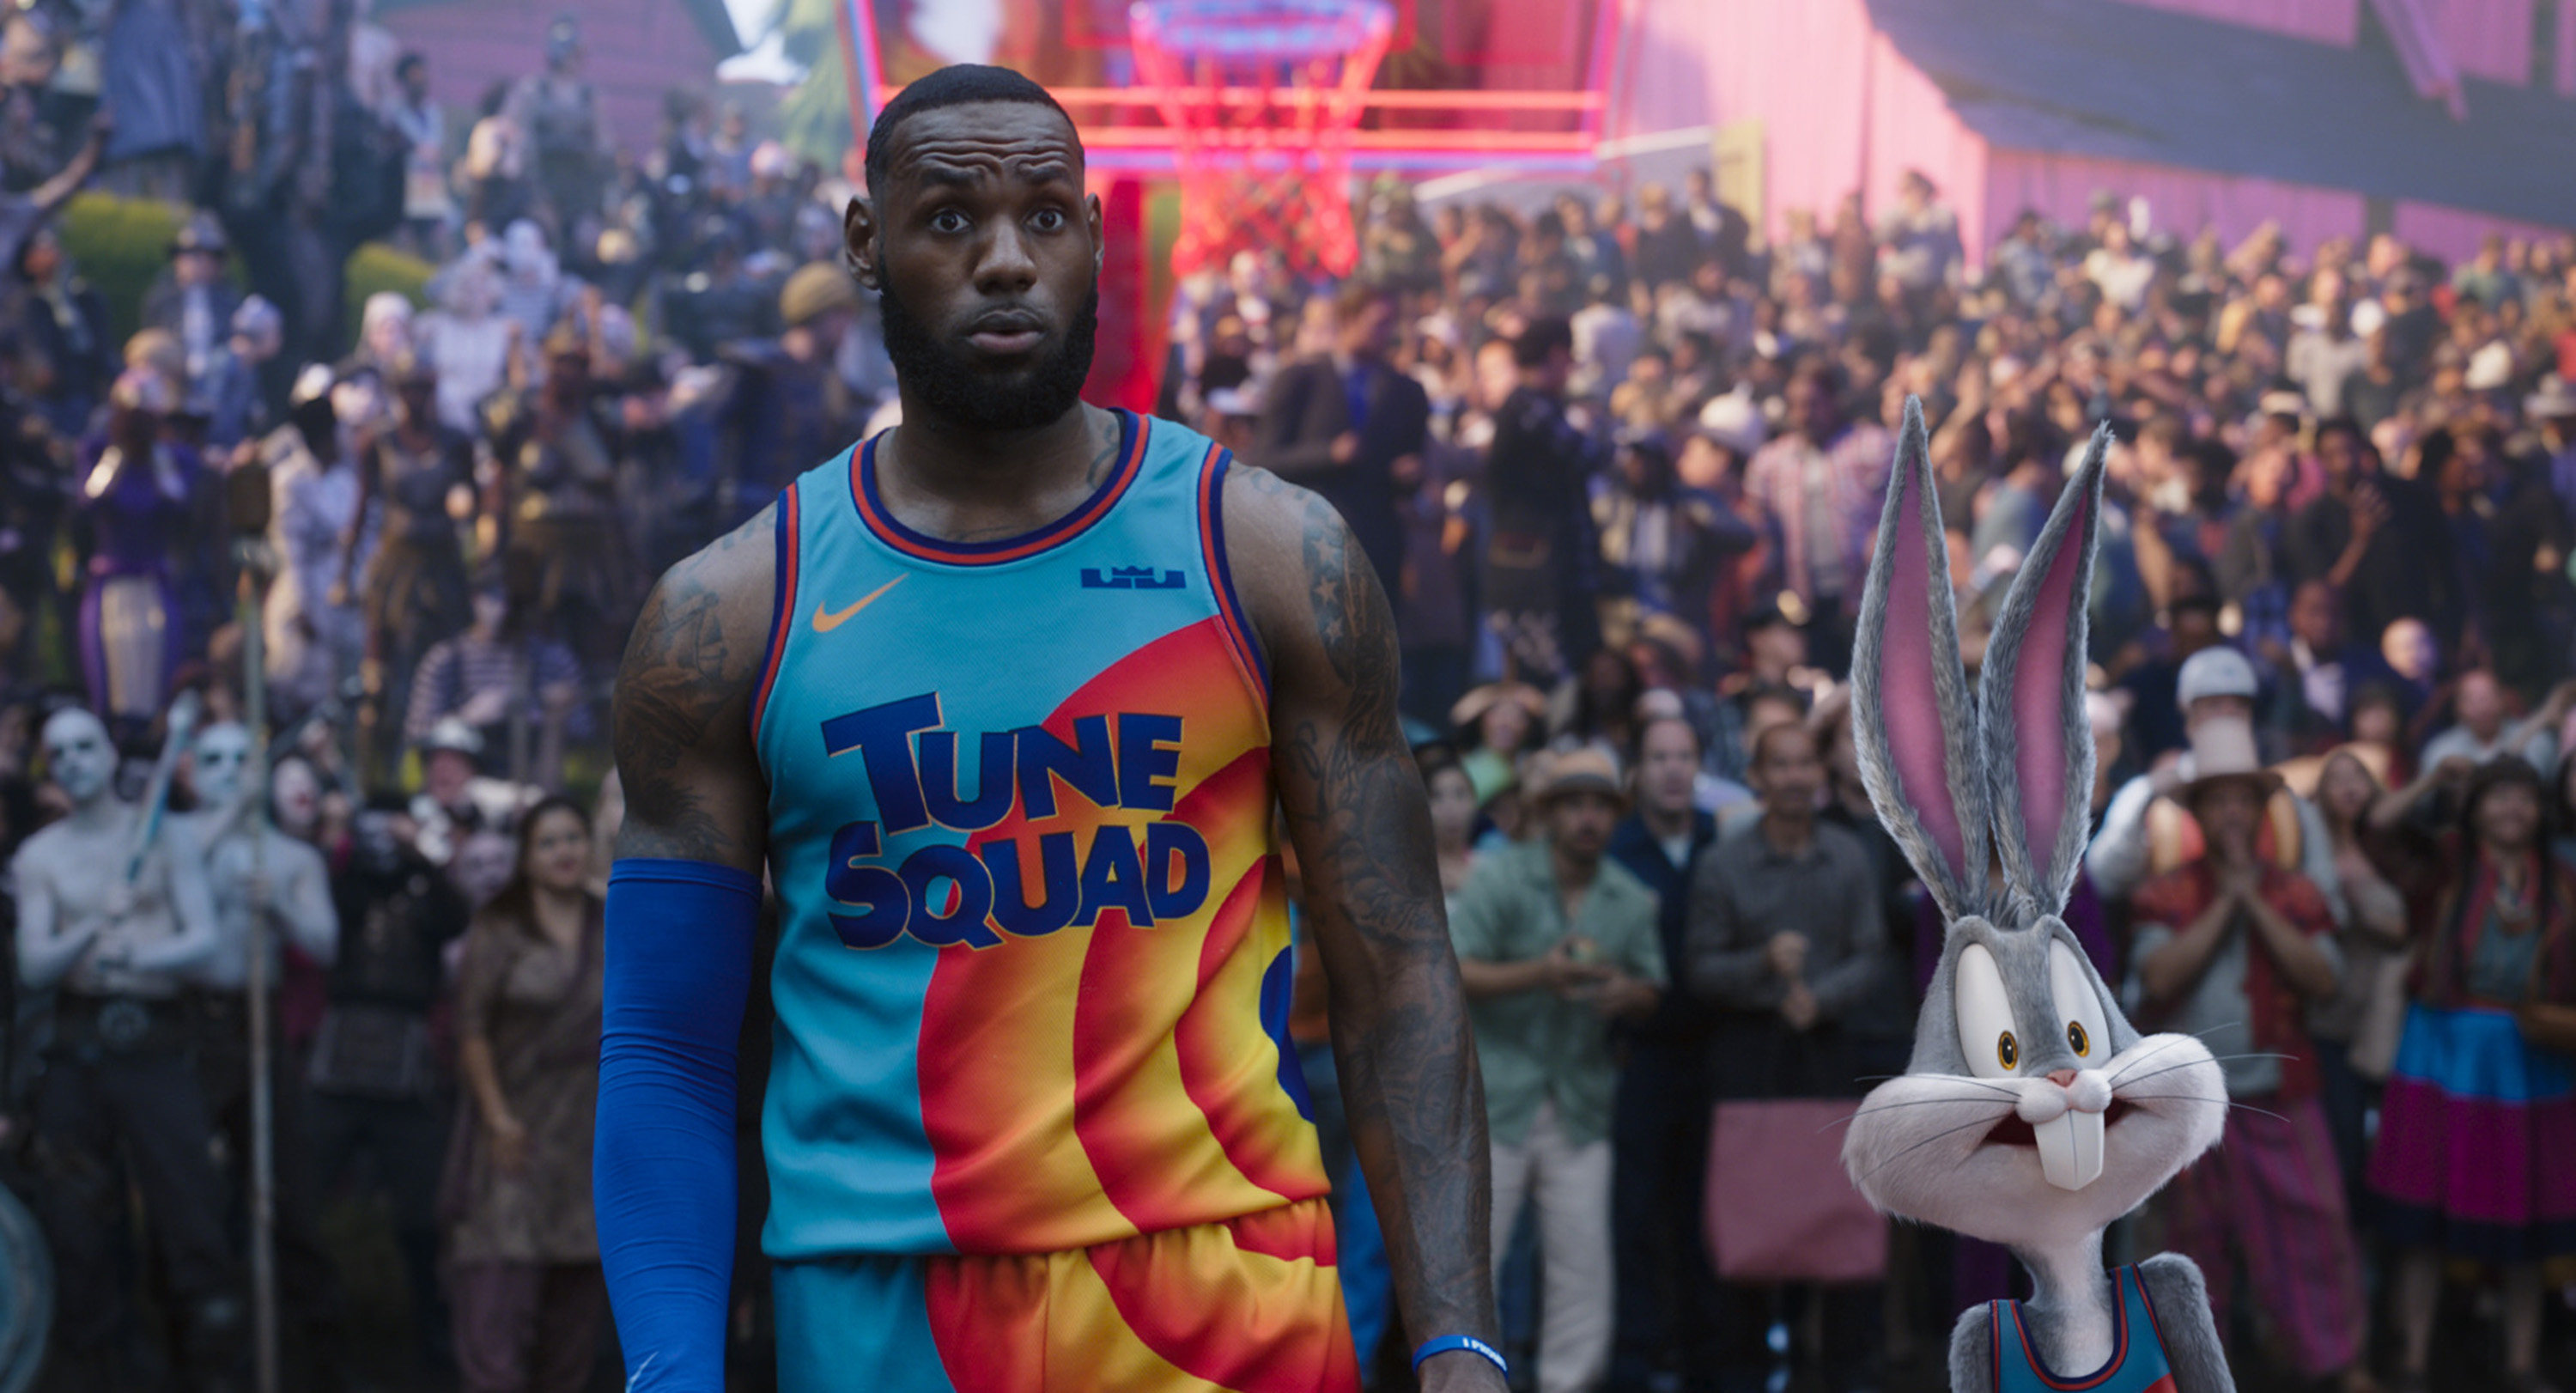 LeBron James makes an unlikely buddy of Bugs Bunny in Space Jam: A New Legacy, a 2021 take on the classic 1996 Michael Jordan film. Photo: Warner Bros. Pictures via TNS